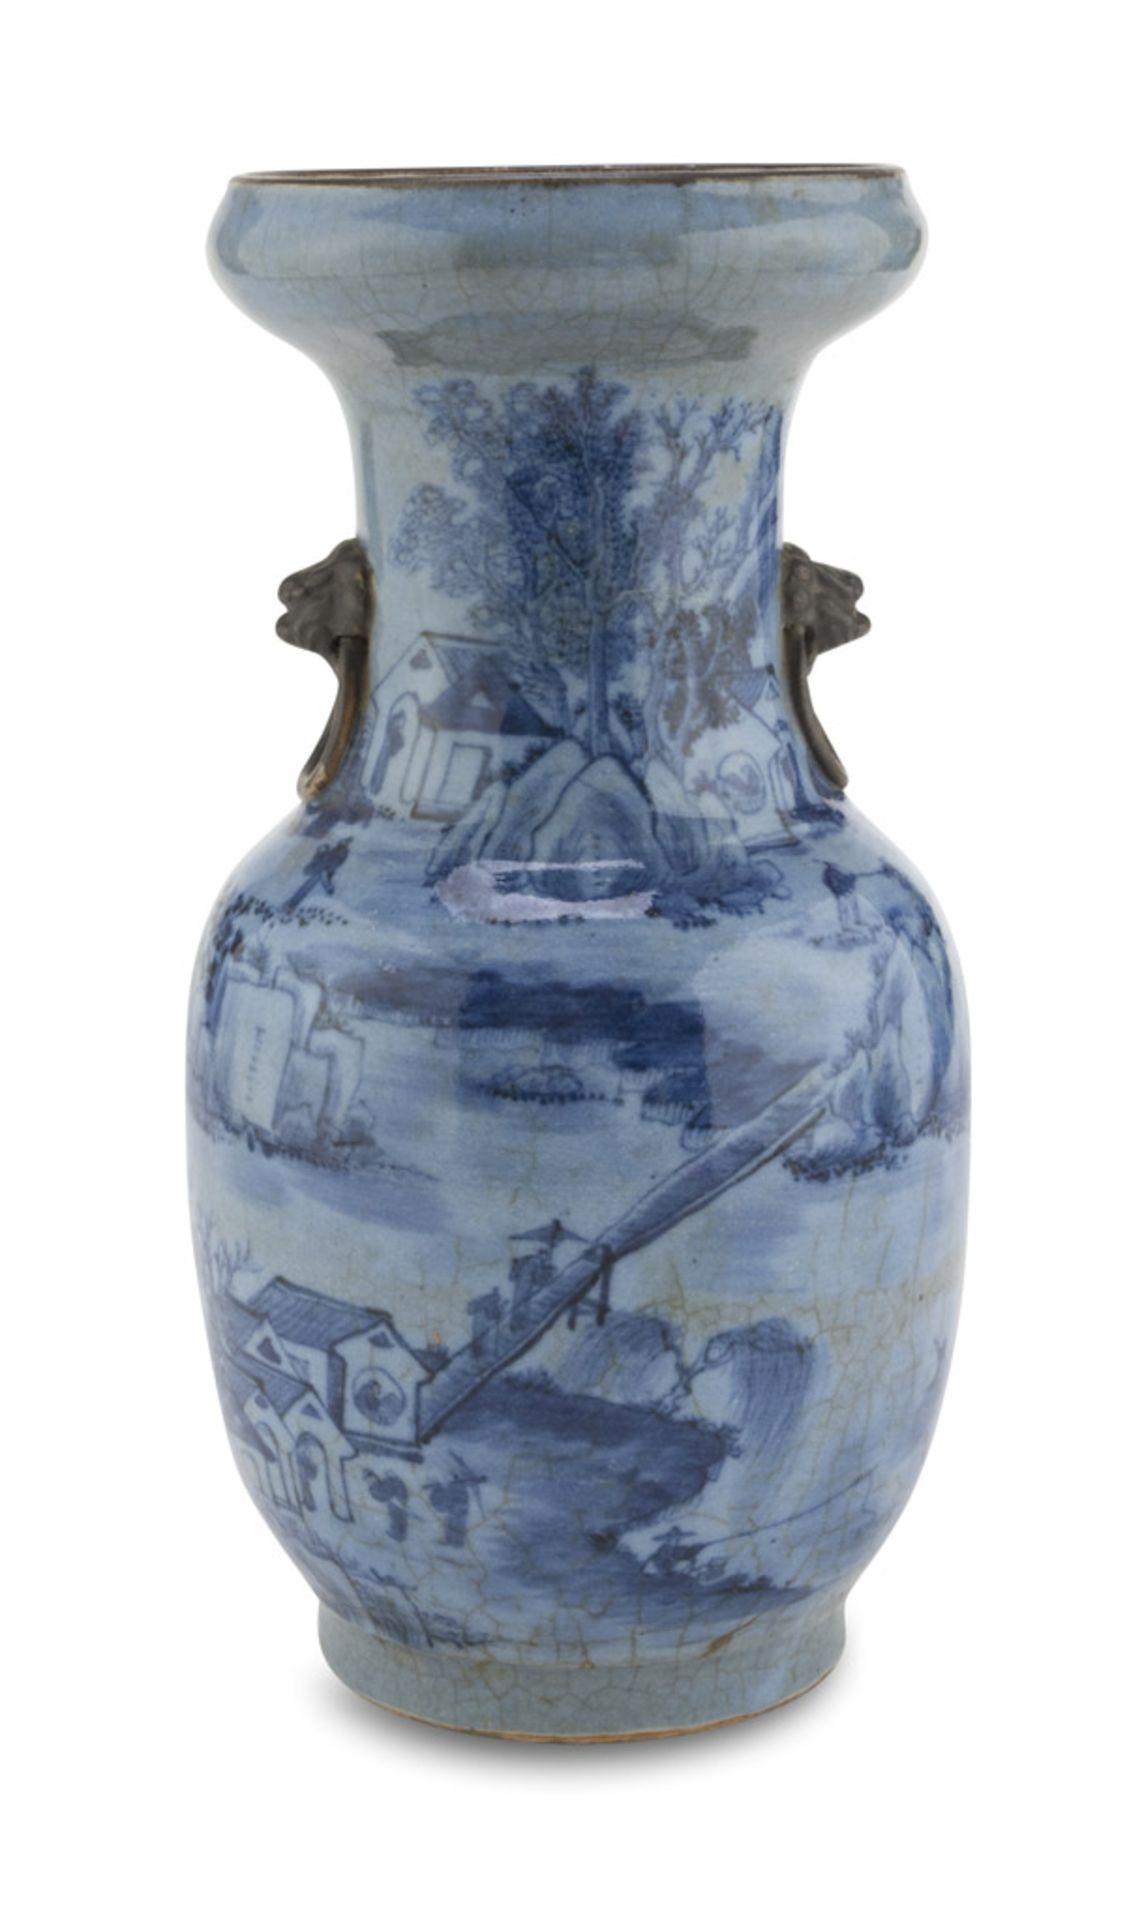 WHITE AND BLUE PORCELAIN VASE, CHINA EARLY 20TH CENTURY decorated with a wide landscape with